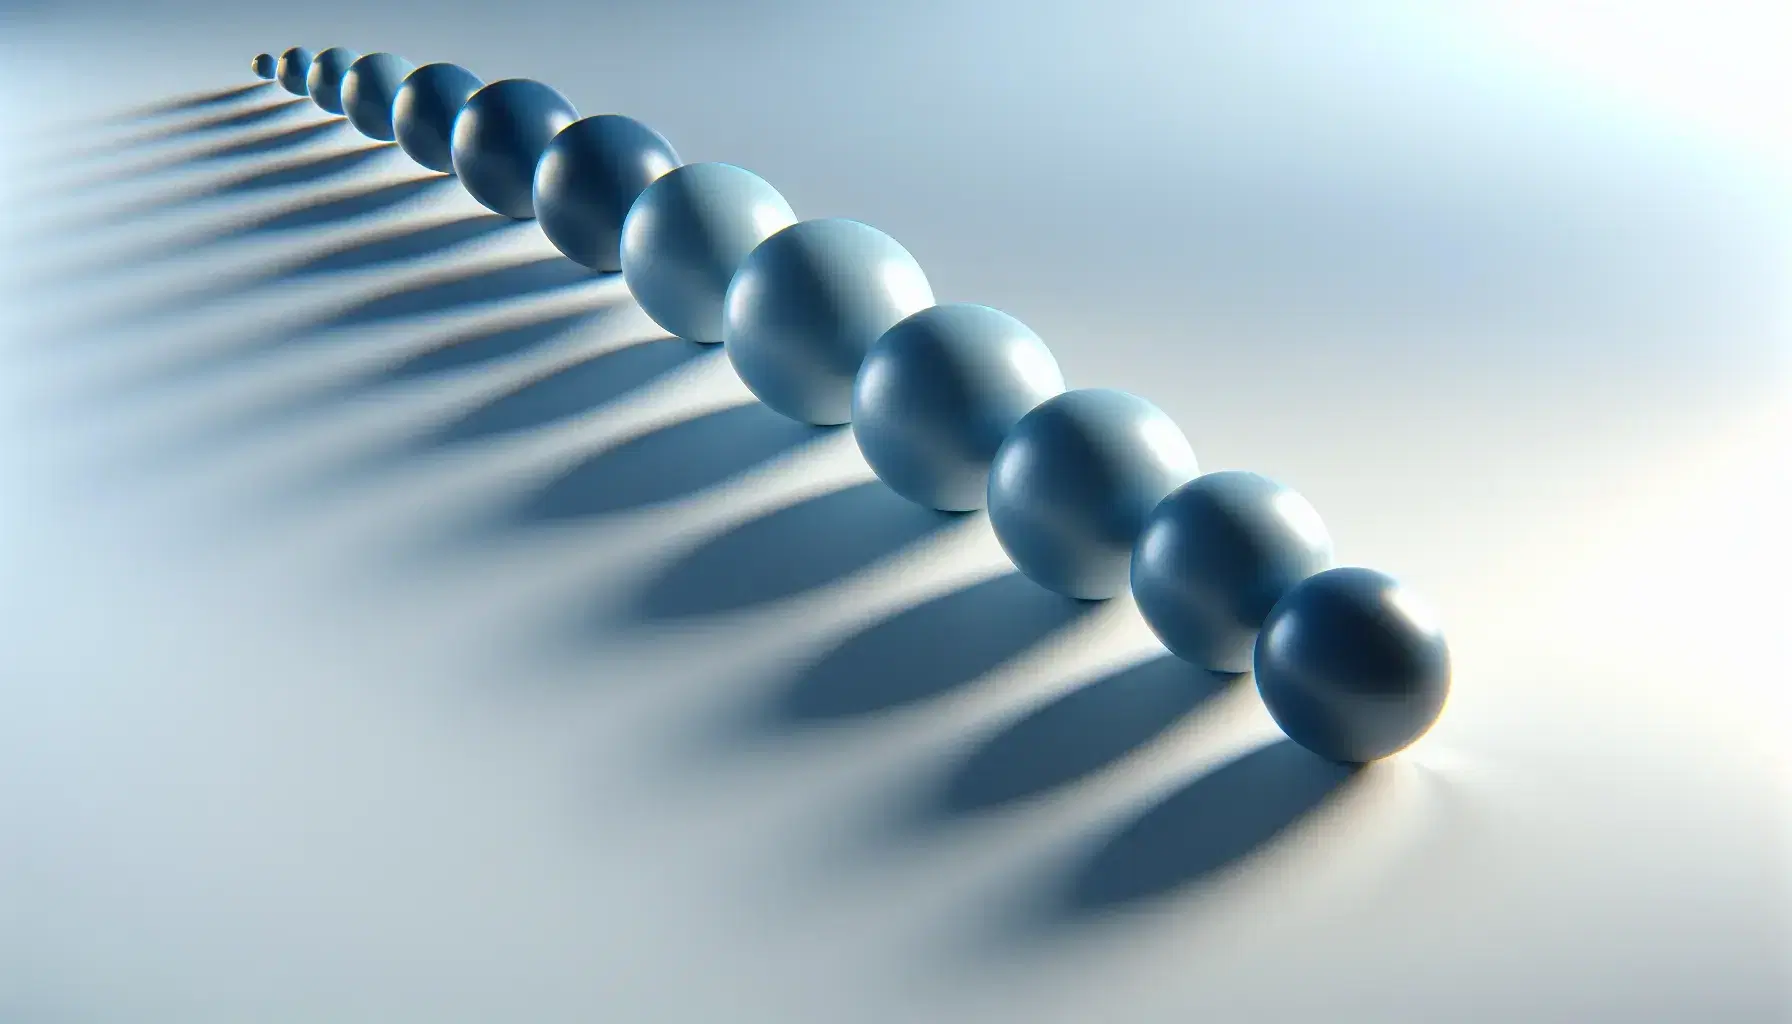 Three-dimensional spheres in shades of blue arranged in a row by increasing size on a white background with delicate shadows on the gray surface.